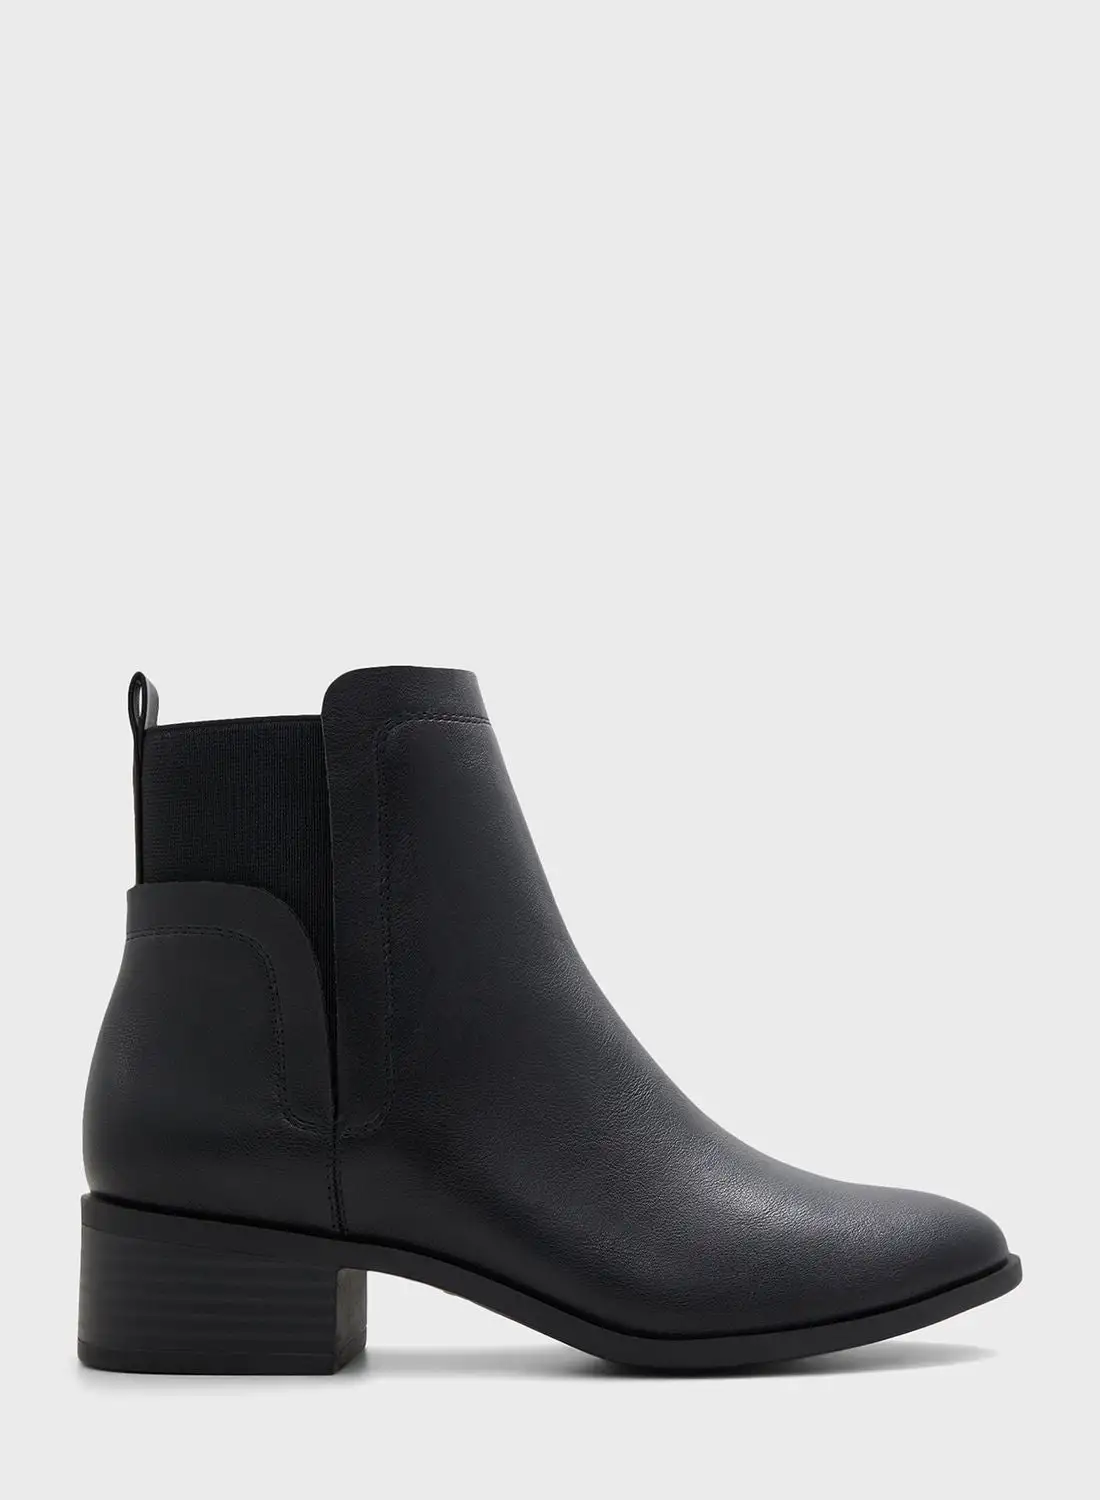 CALL IT SPRING Cassi Ankle Boots